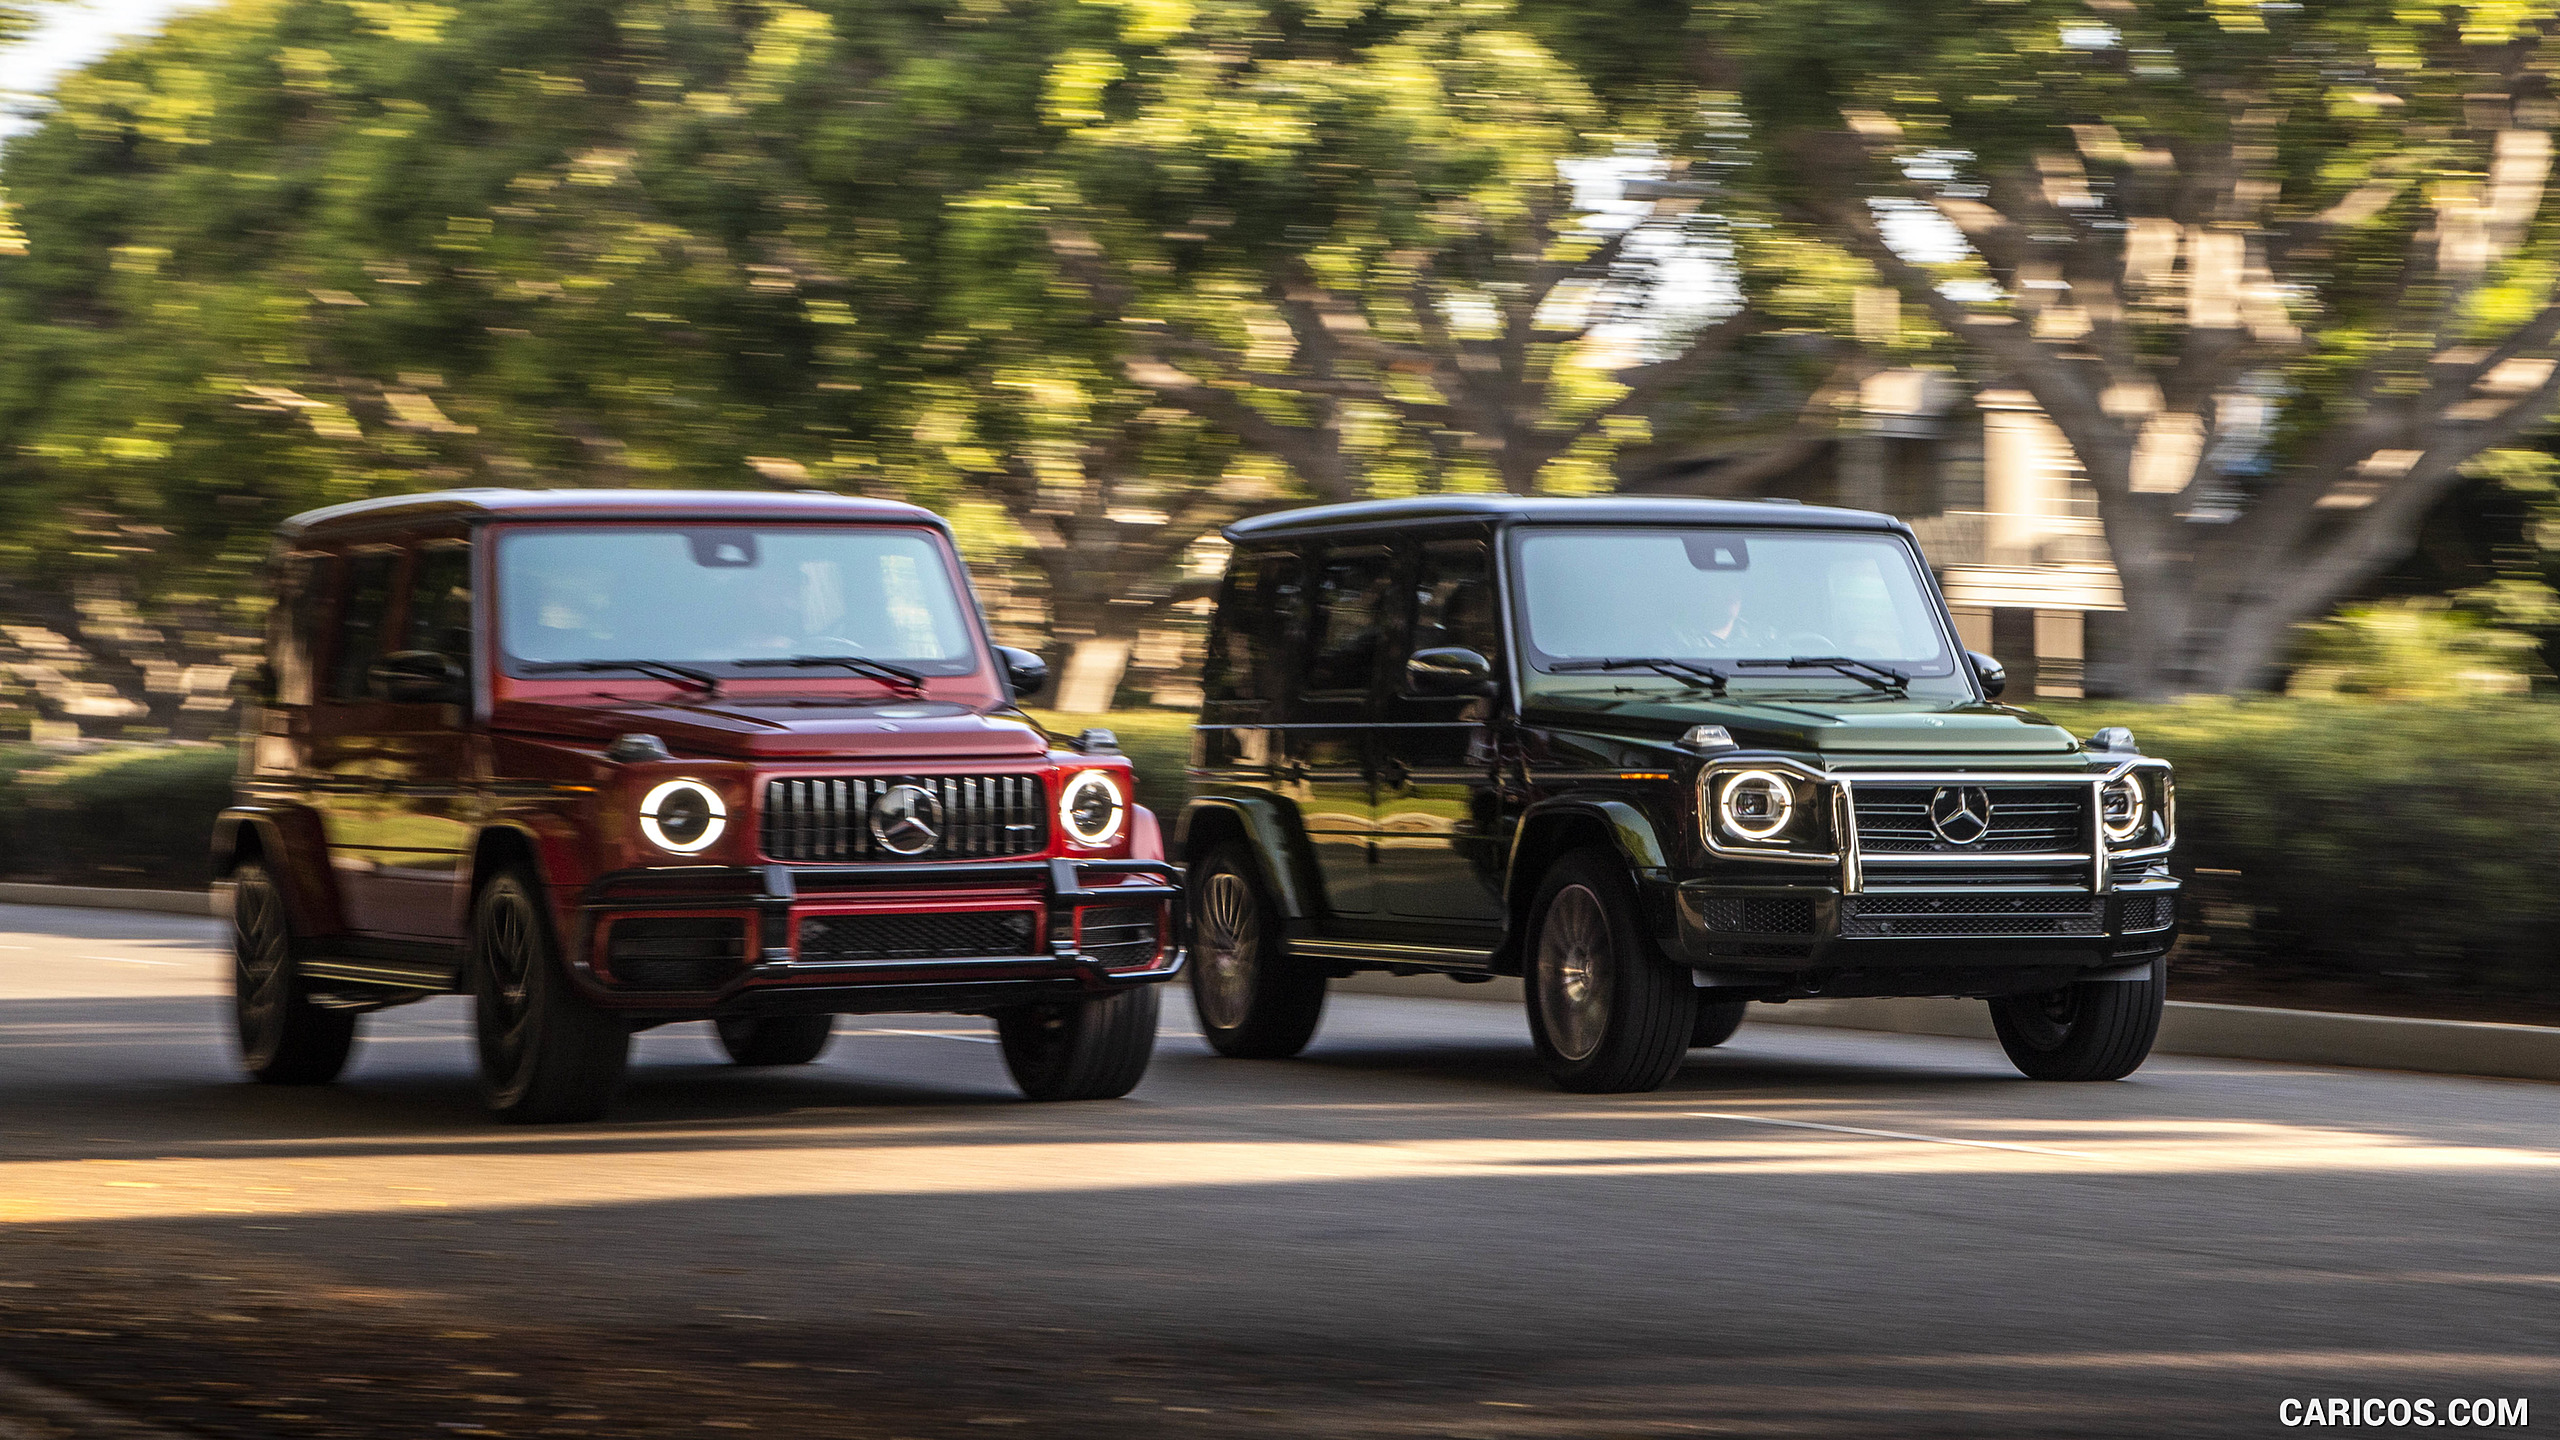 2019 Mercedes-AMG G63 (U.S.-Spec) and 2019 G550, #318 of 452